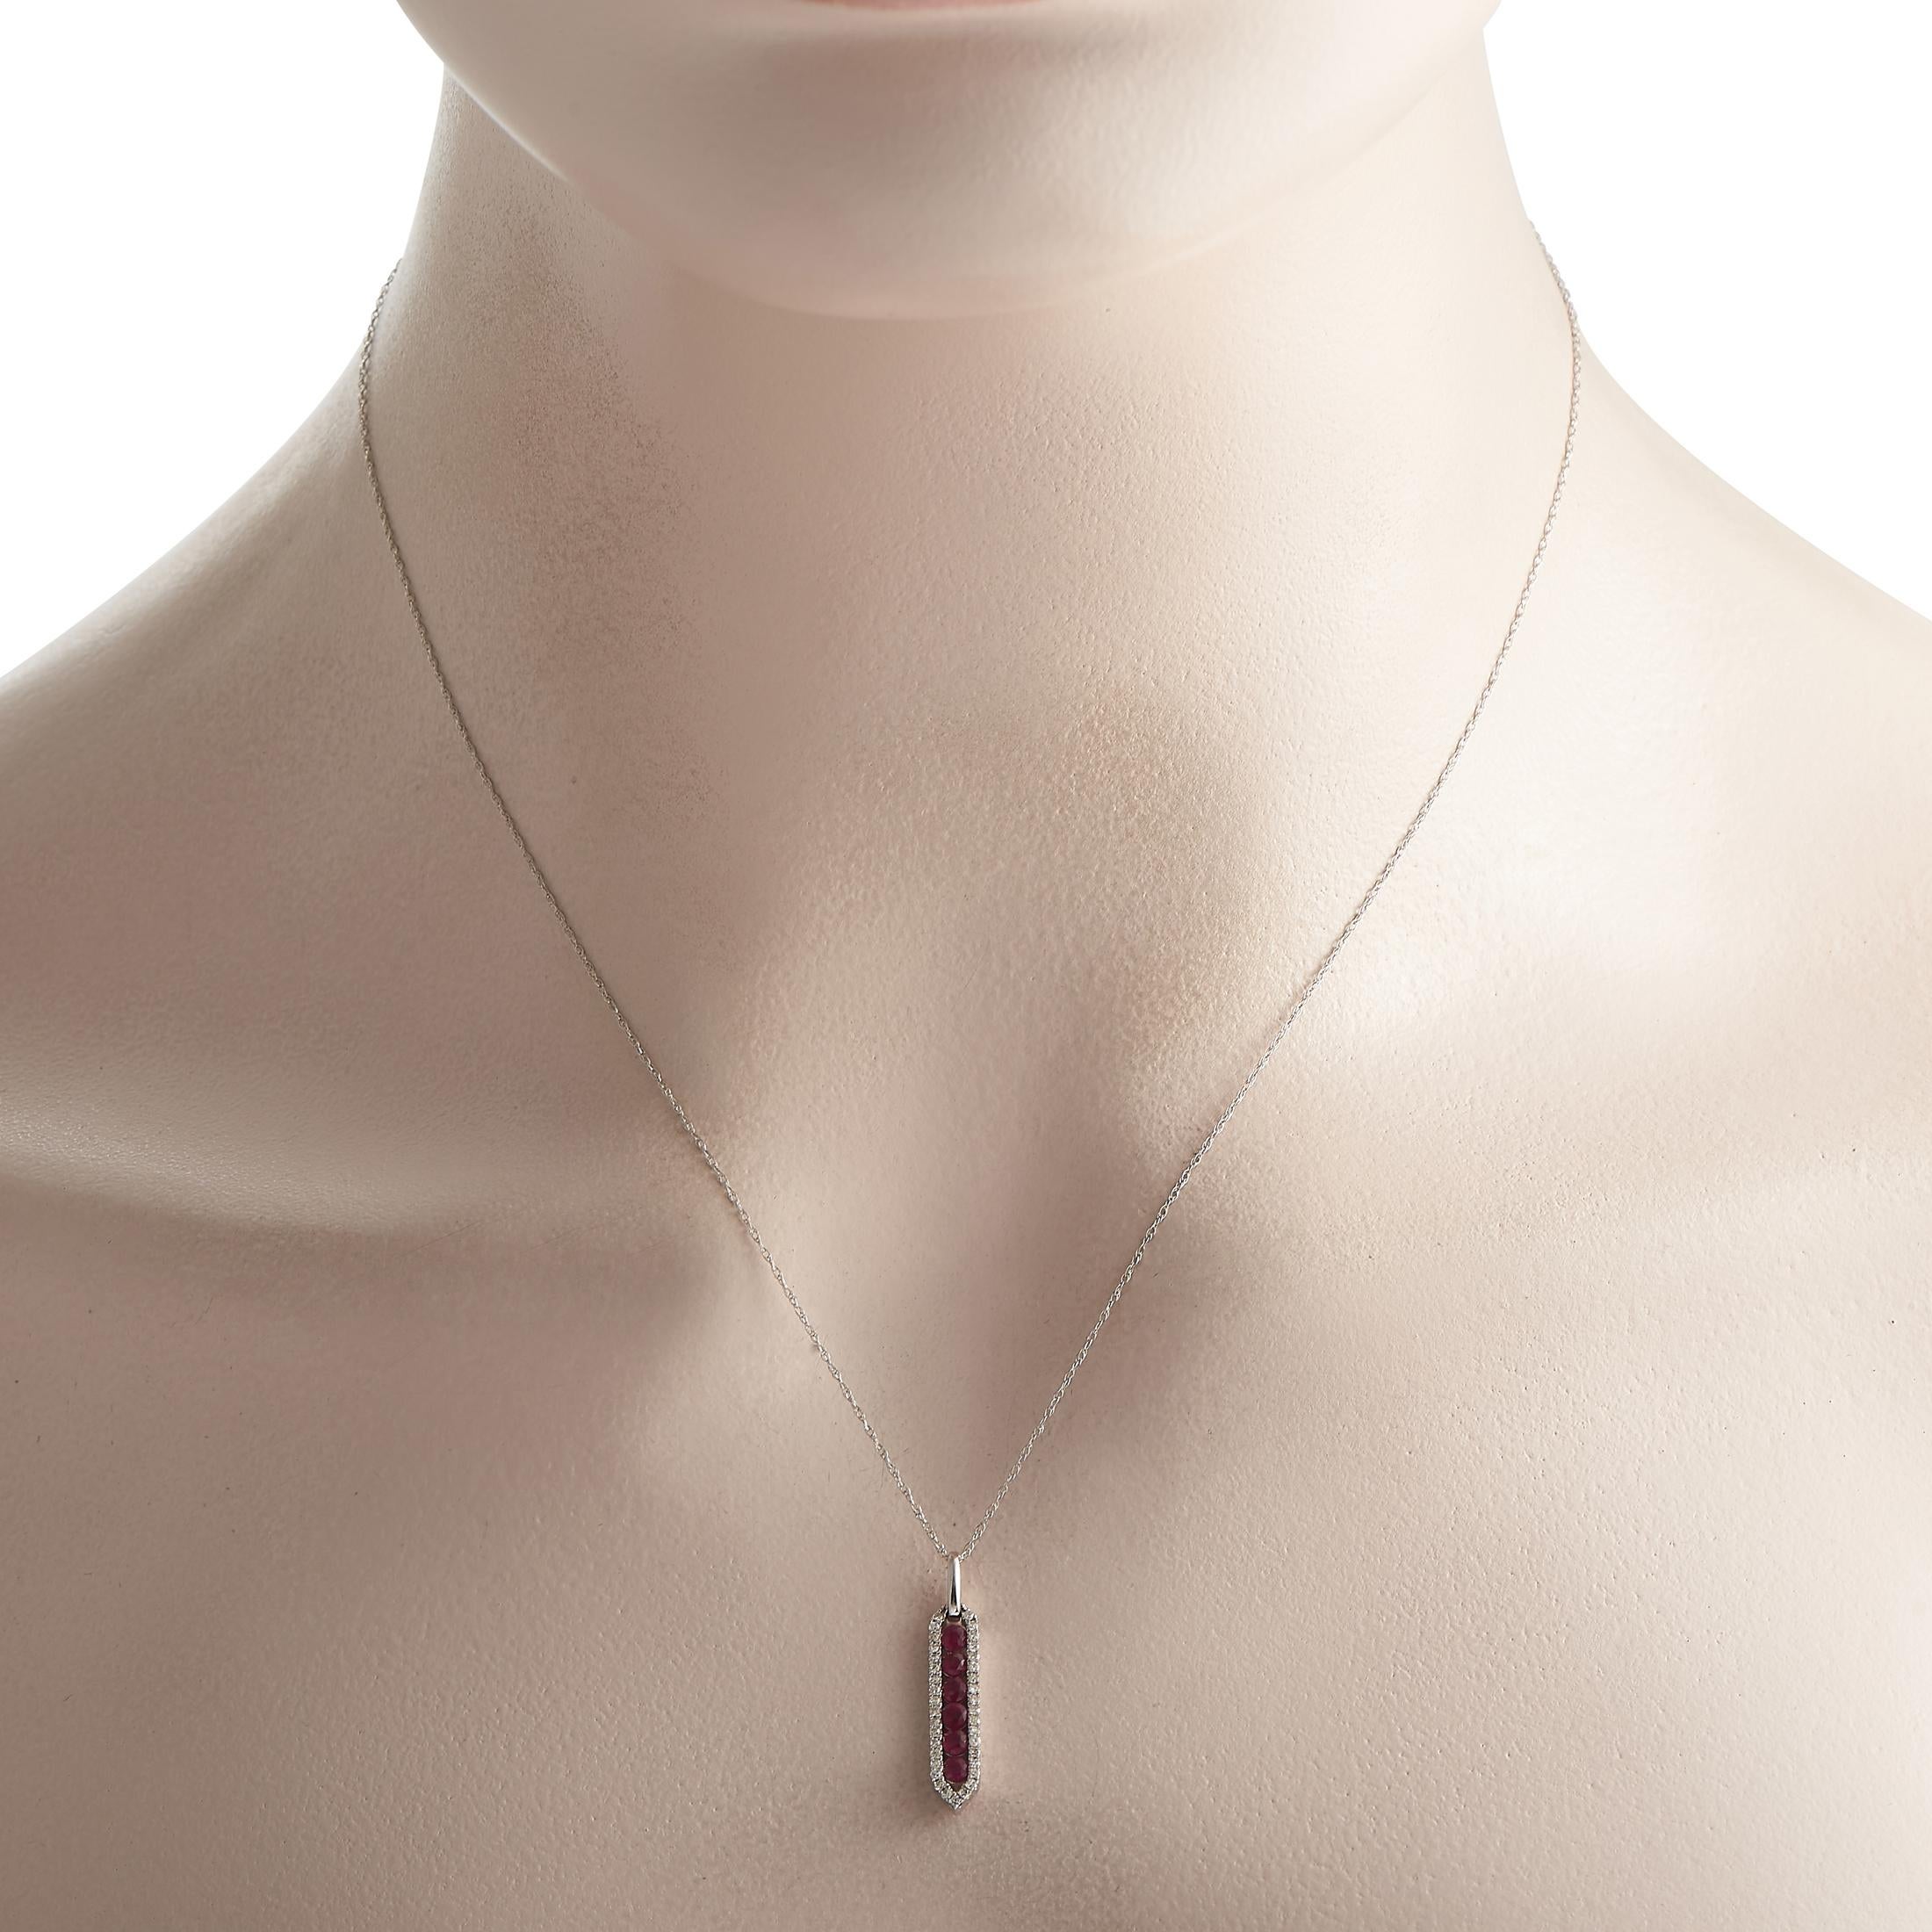 Put on this diamond and ruby necklace and let your look sparkle with a statement. This 14K white gold piece has a 17 long cable chain with a spring ring clasp. A chic pendant with six faceted rubies set vertically and evenly on an elongated frame is